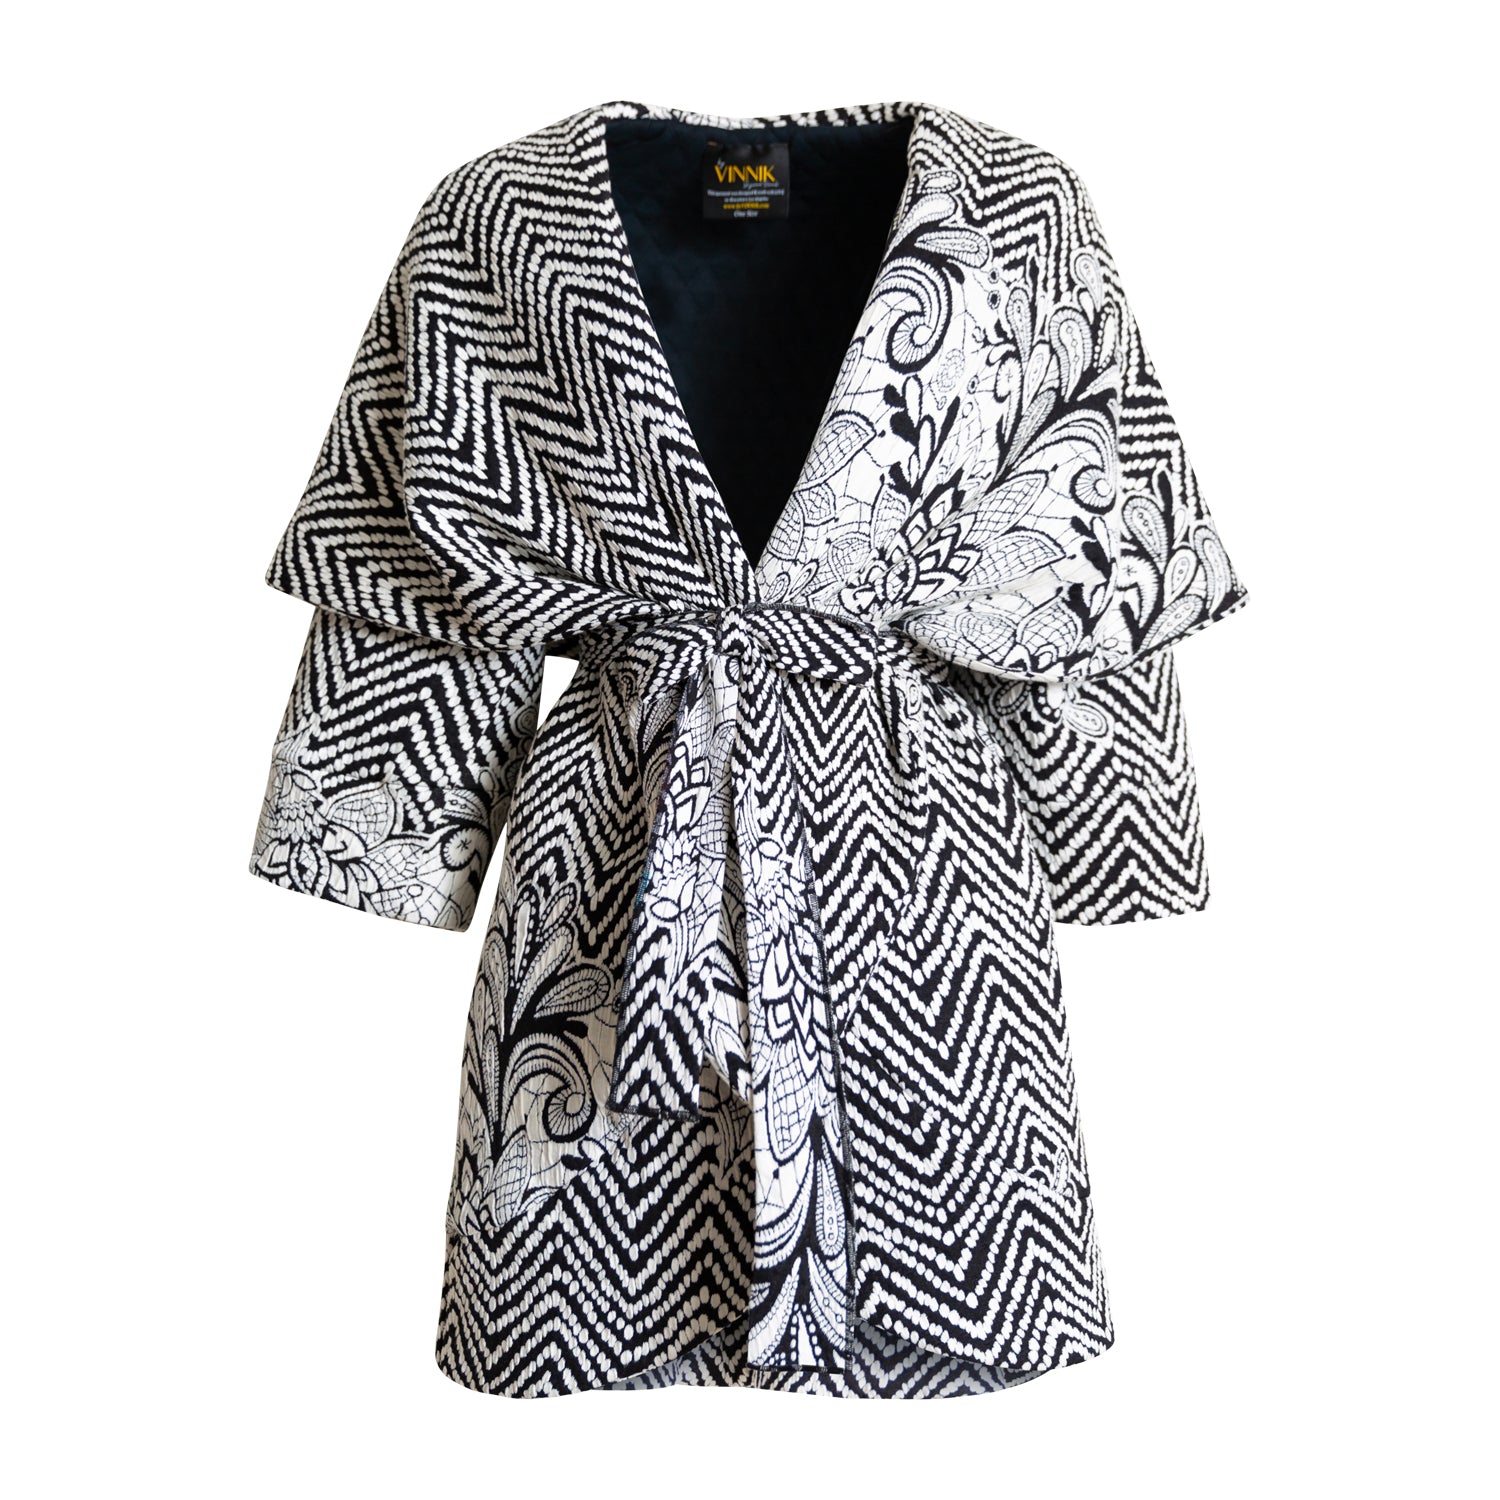 Women’s Black / White Knit Black And White Quilted Cocoon Coat - Doctor Atomic Xxl/3Xl Byvinnik